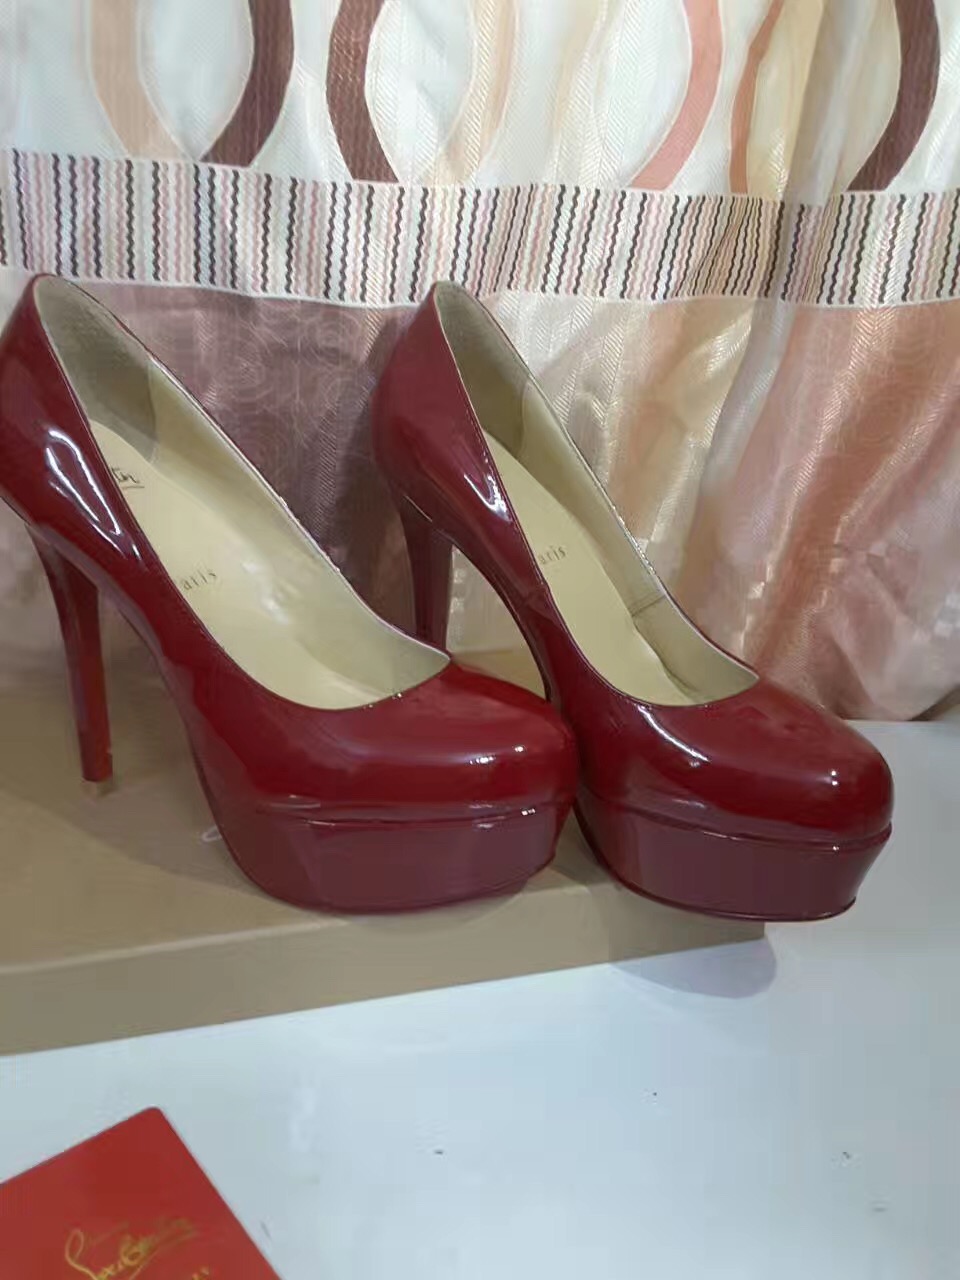 Christian Louboutin 13cm red heels sandals shoes